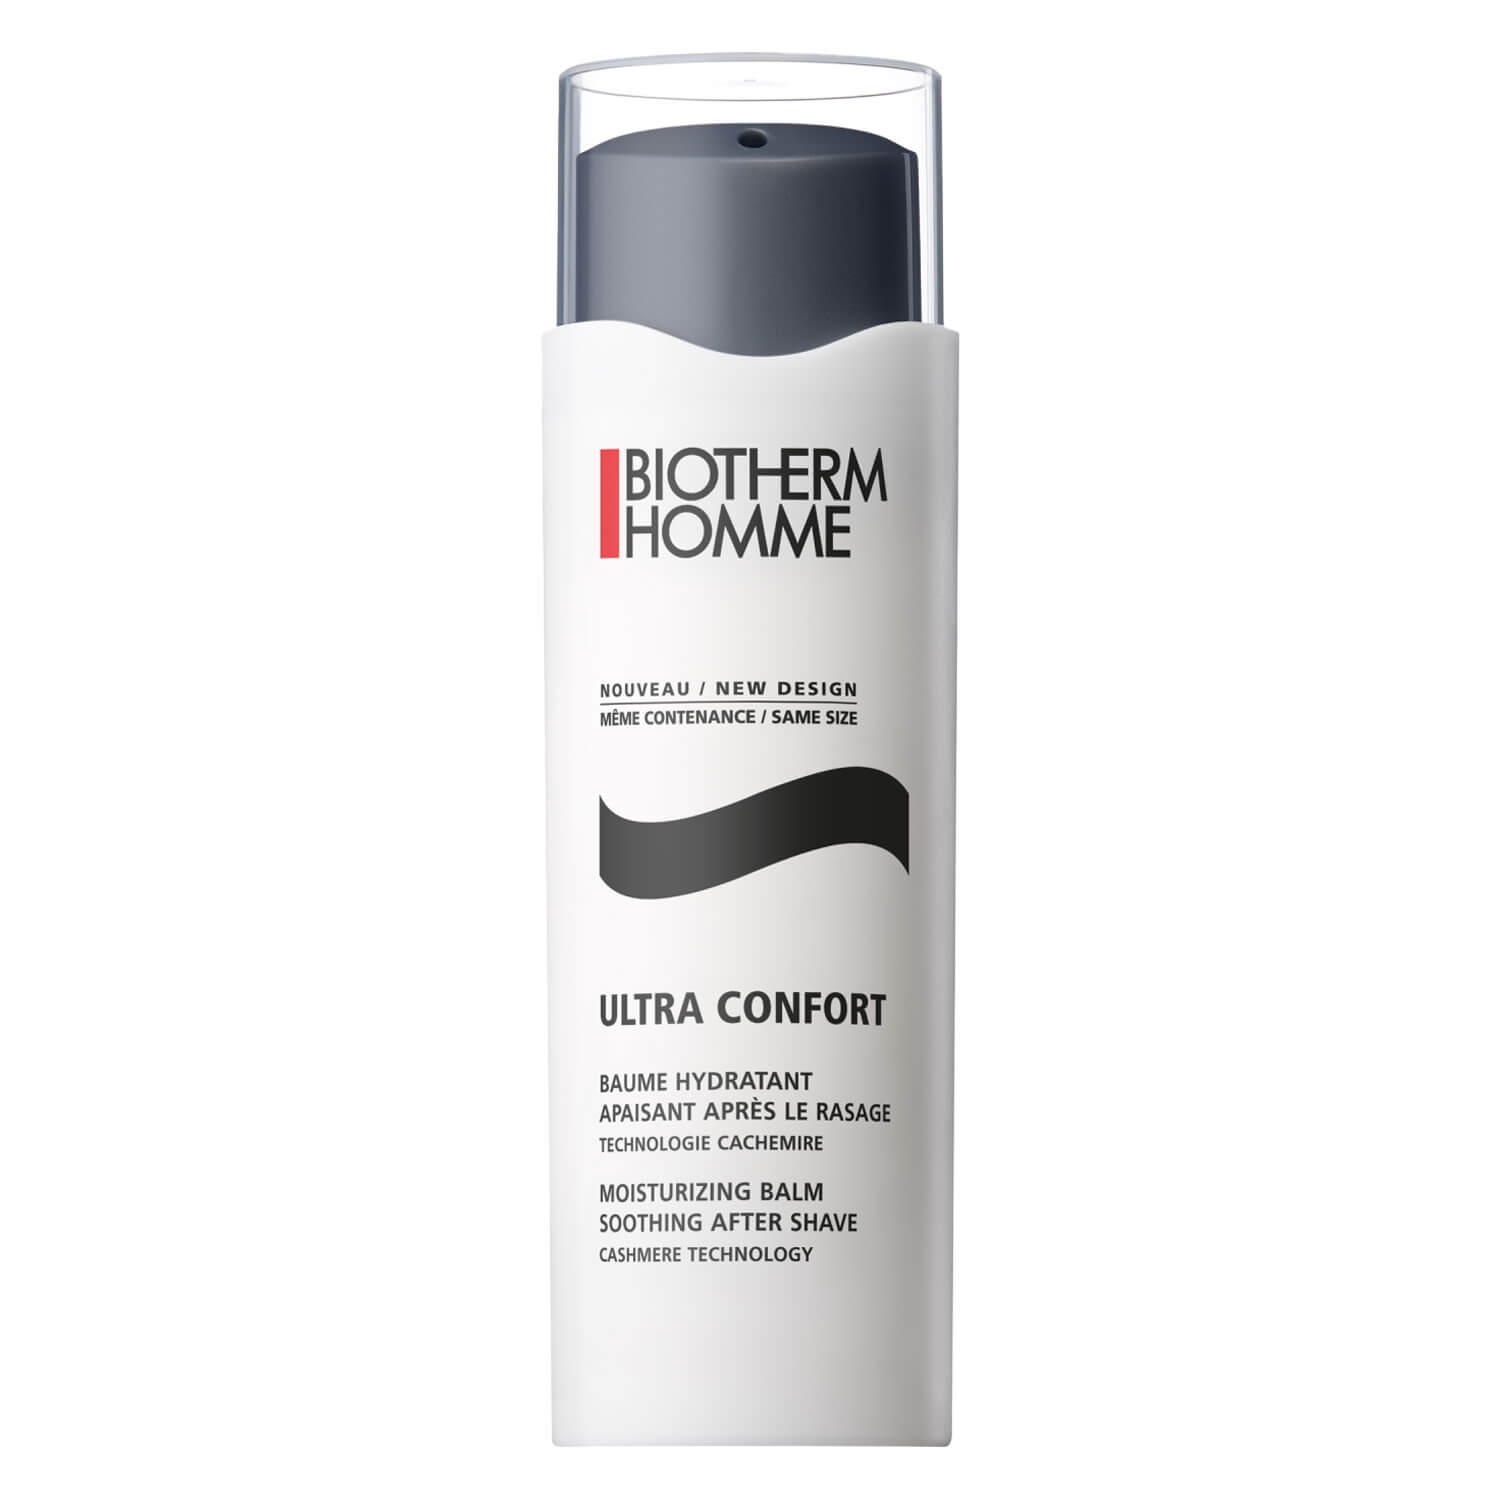 Product image from Biotherm Homme - Basics Line Confort Balm